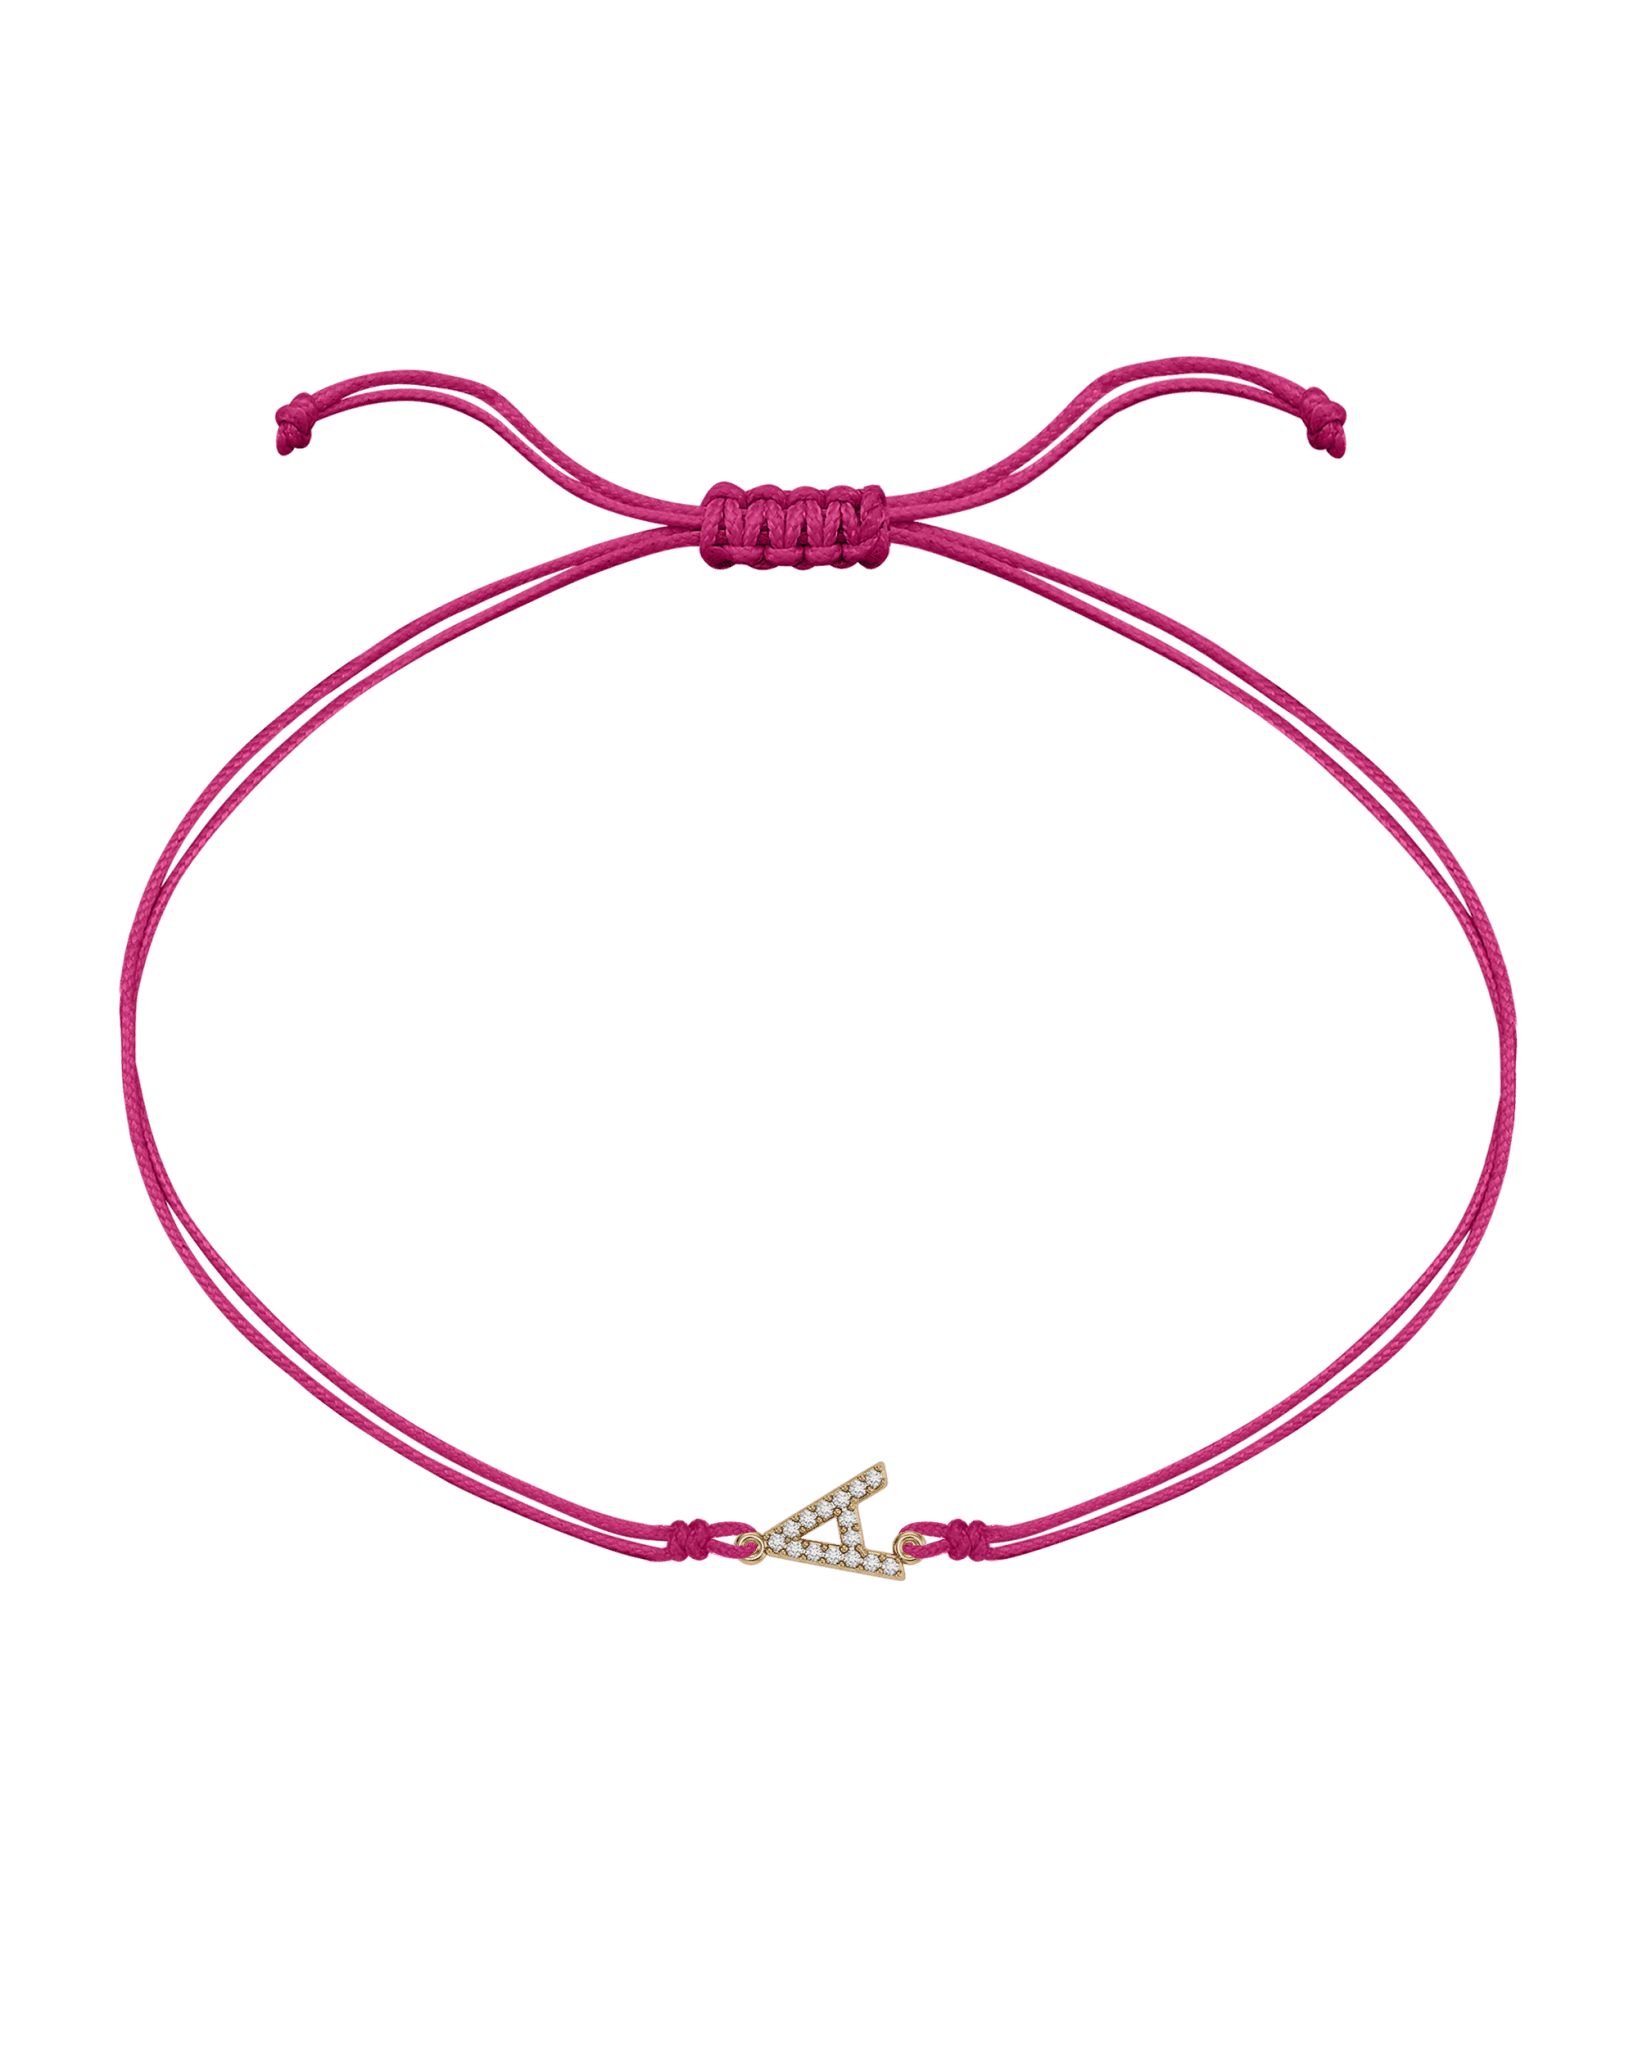 Paved Diamond Initial String of Love - 14K Yellow Gold Bracelet 14K Solid Gold Pink 